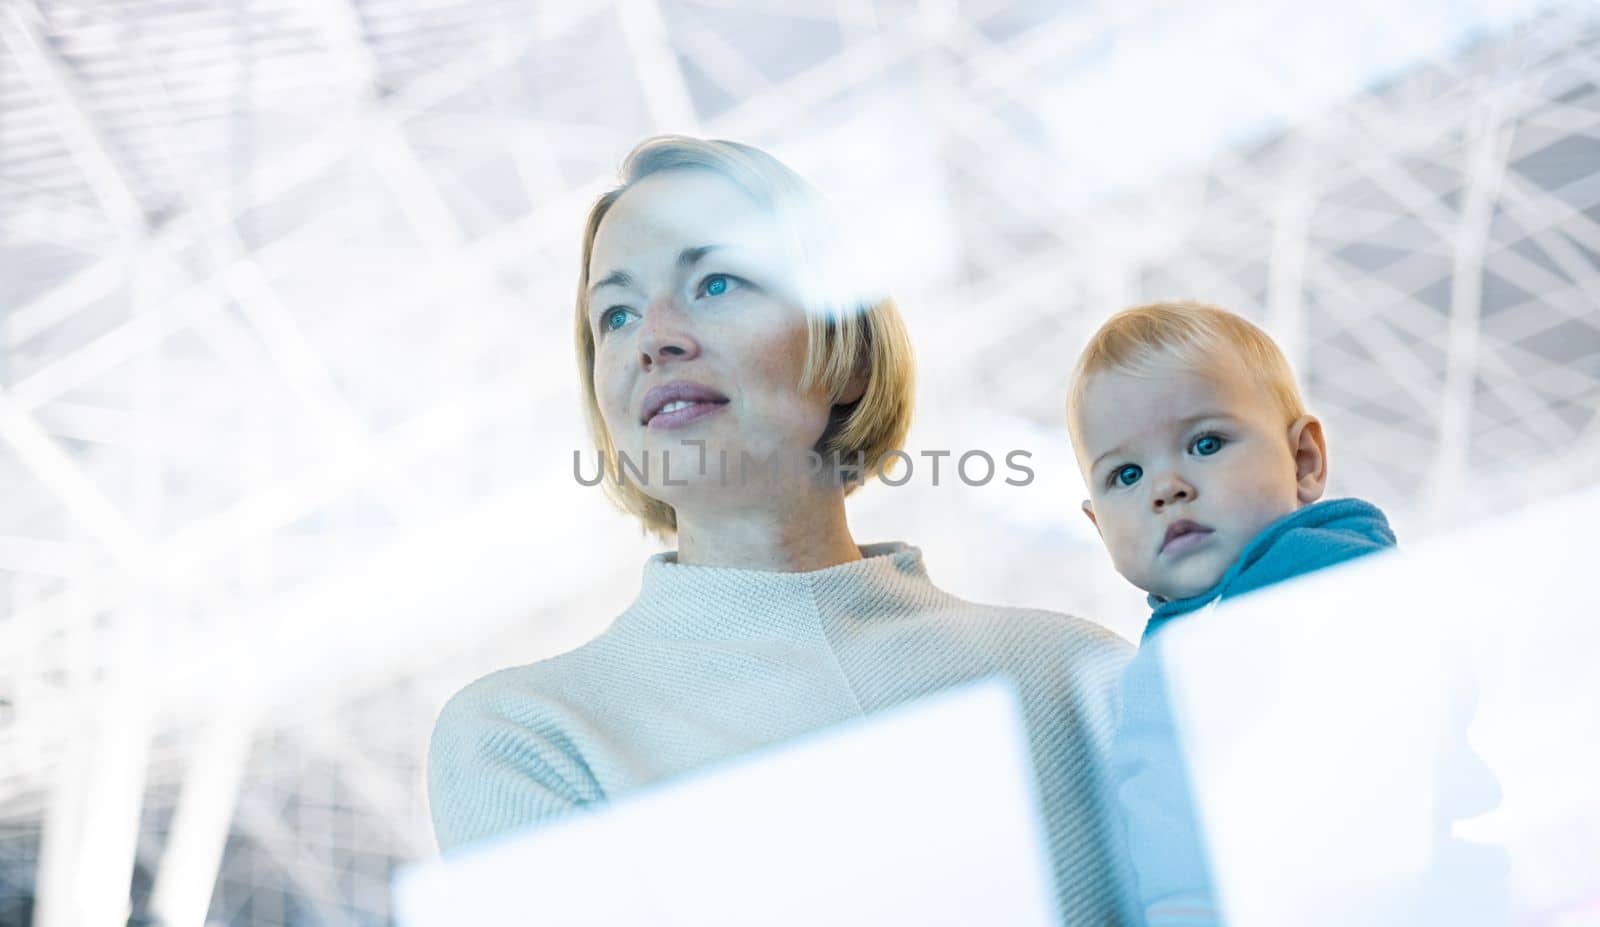 Thoughtful young mother looking trough window holding his infant baby boy child while waiting to board an airplane at airport terminal departure gates. Travel with baby concept